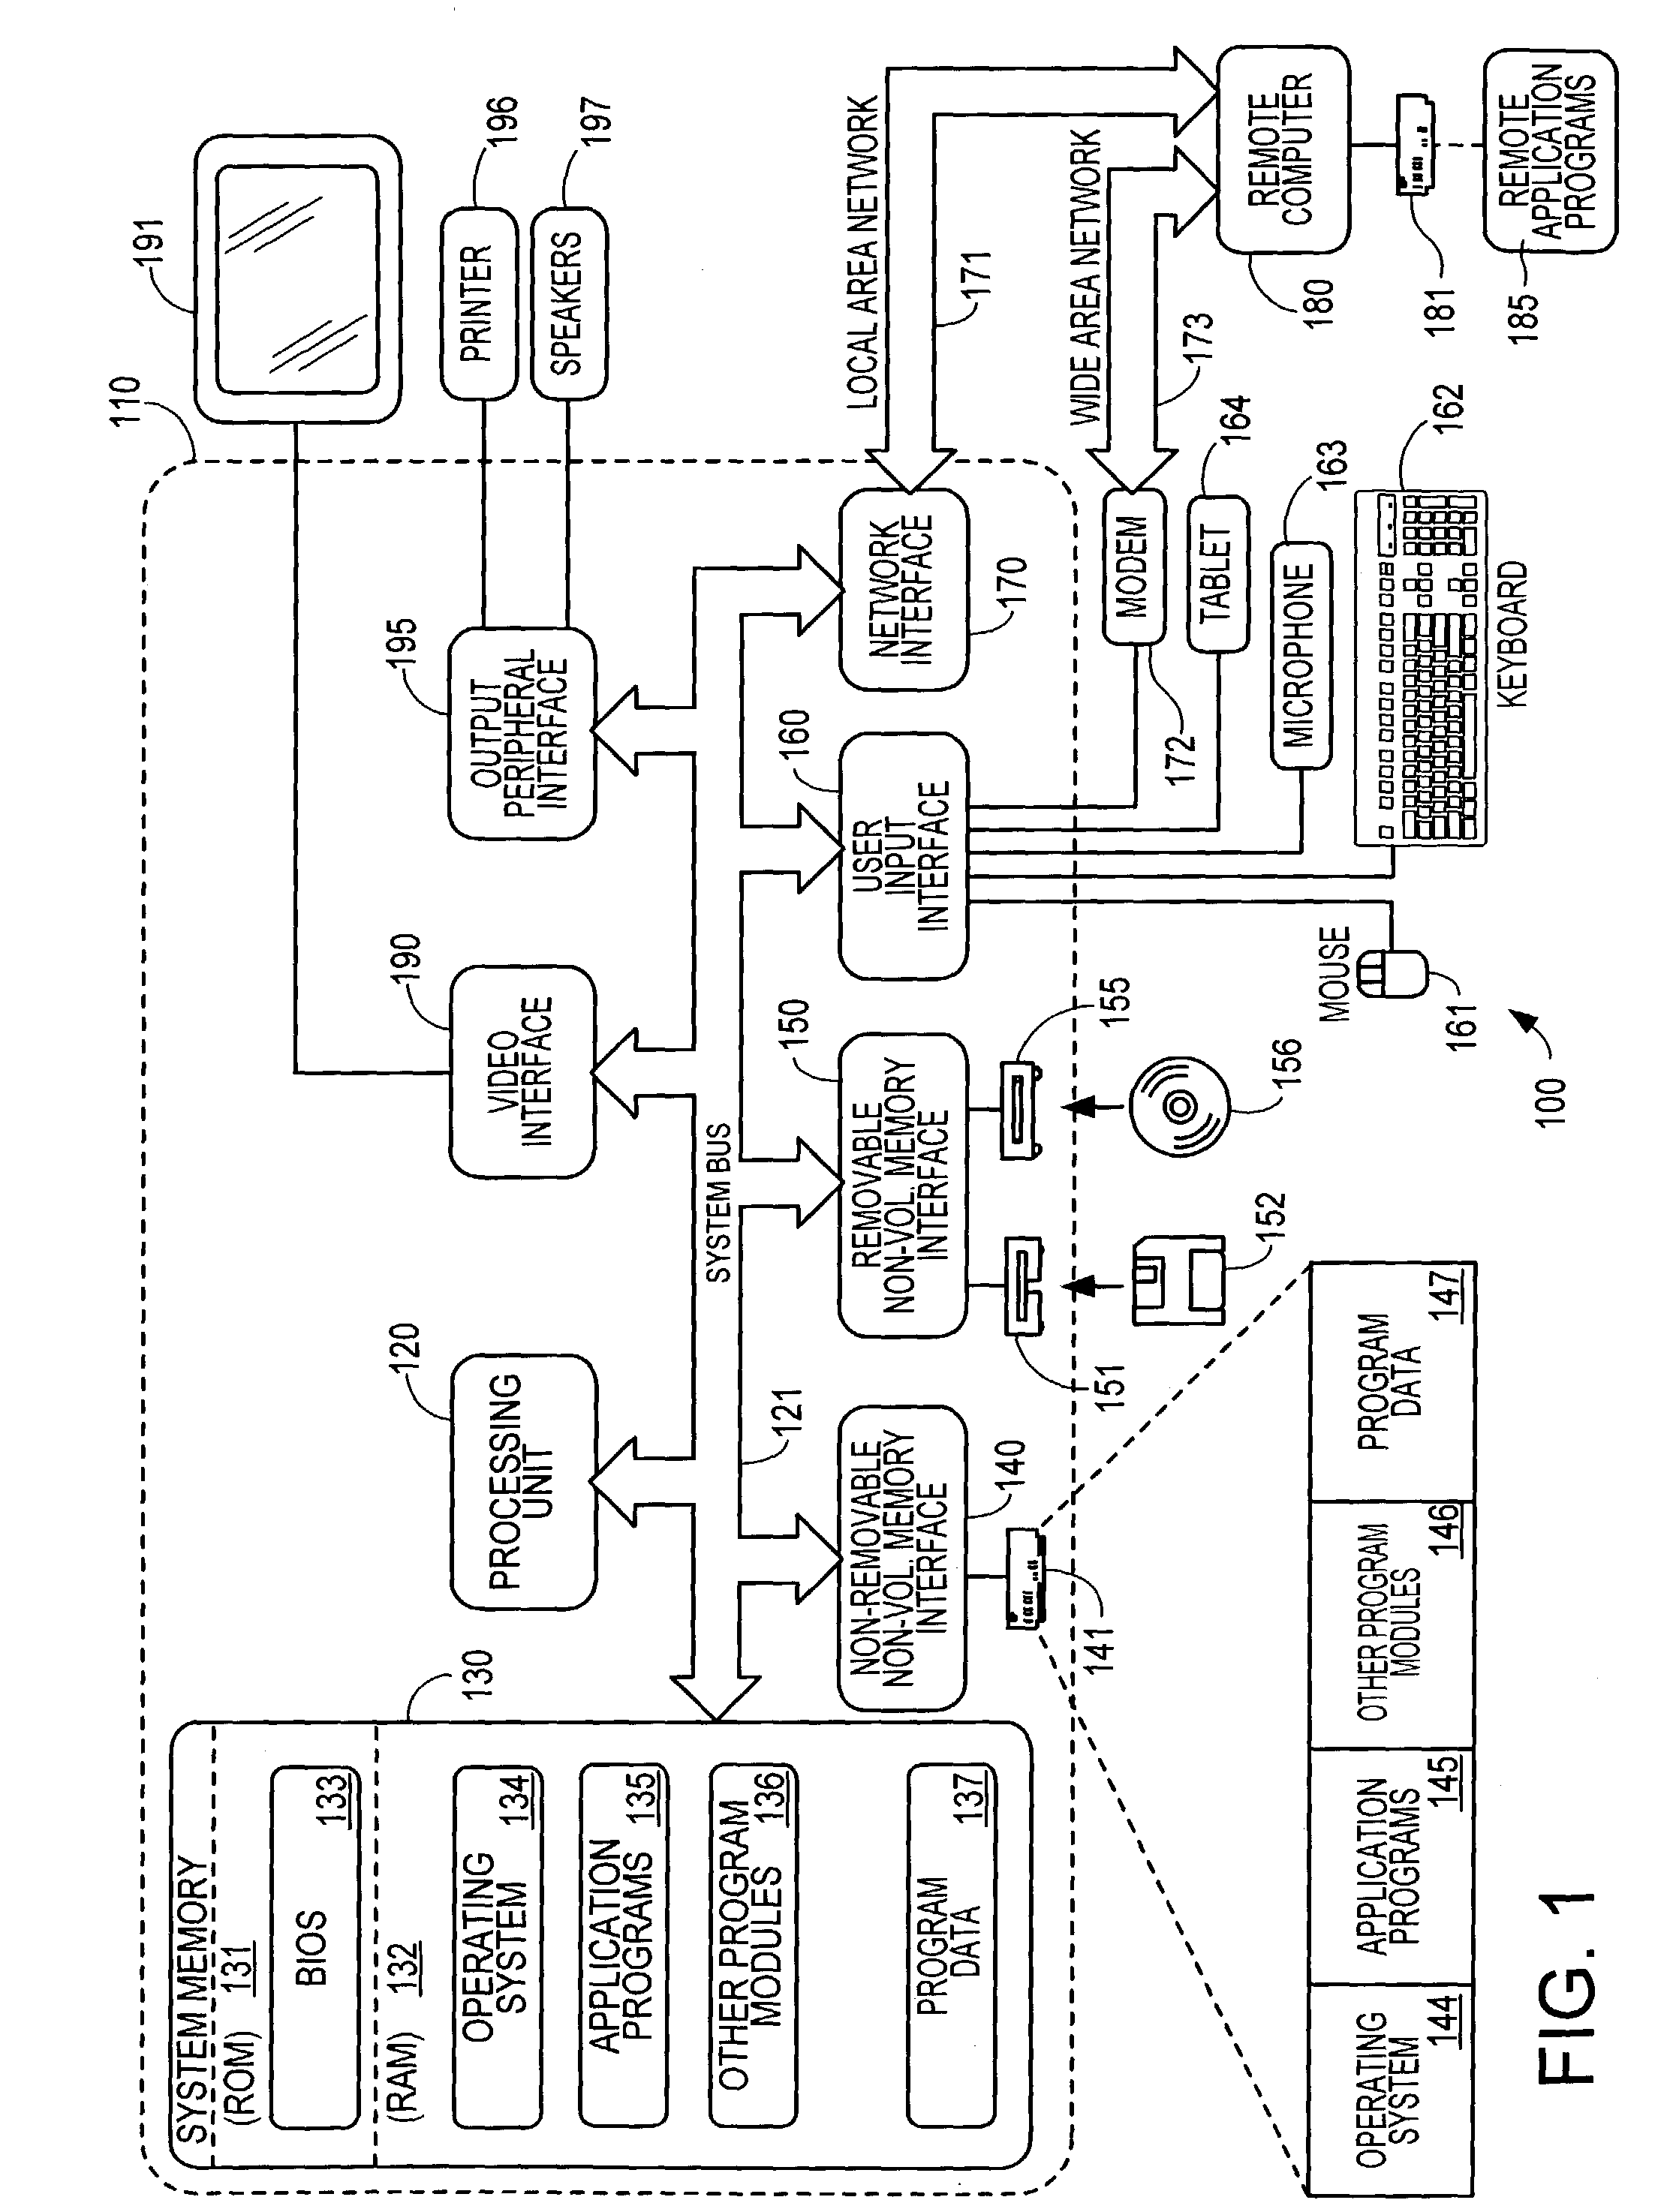 Controlled relay of media streams across network perimeters